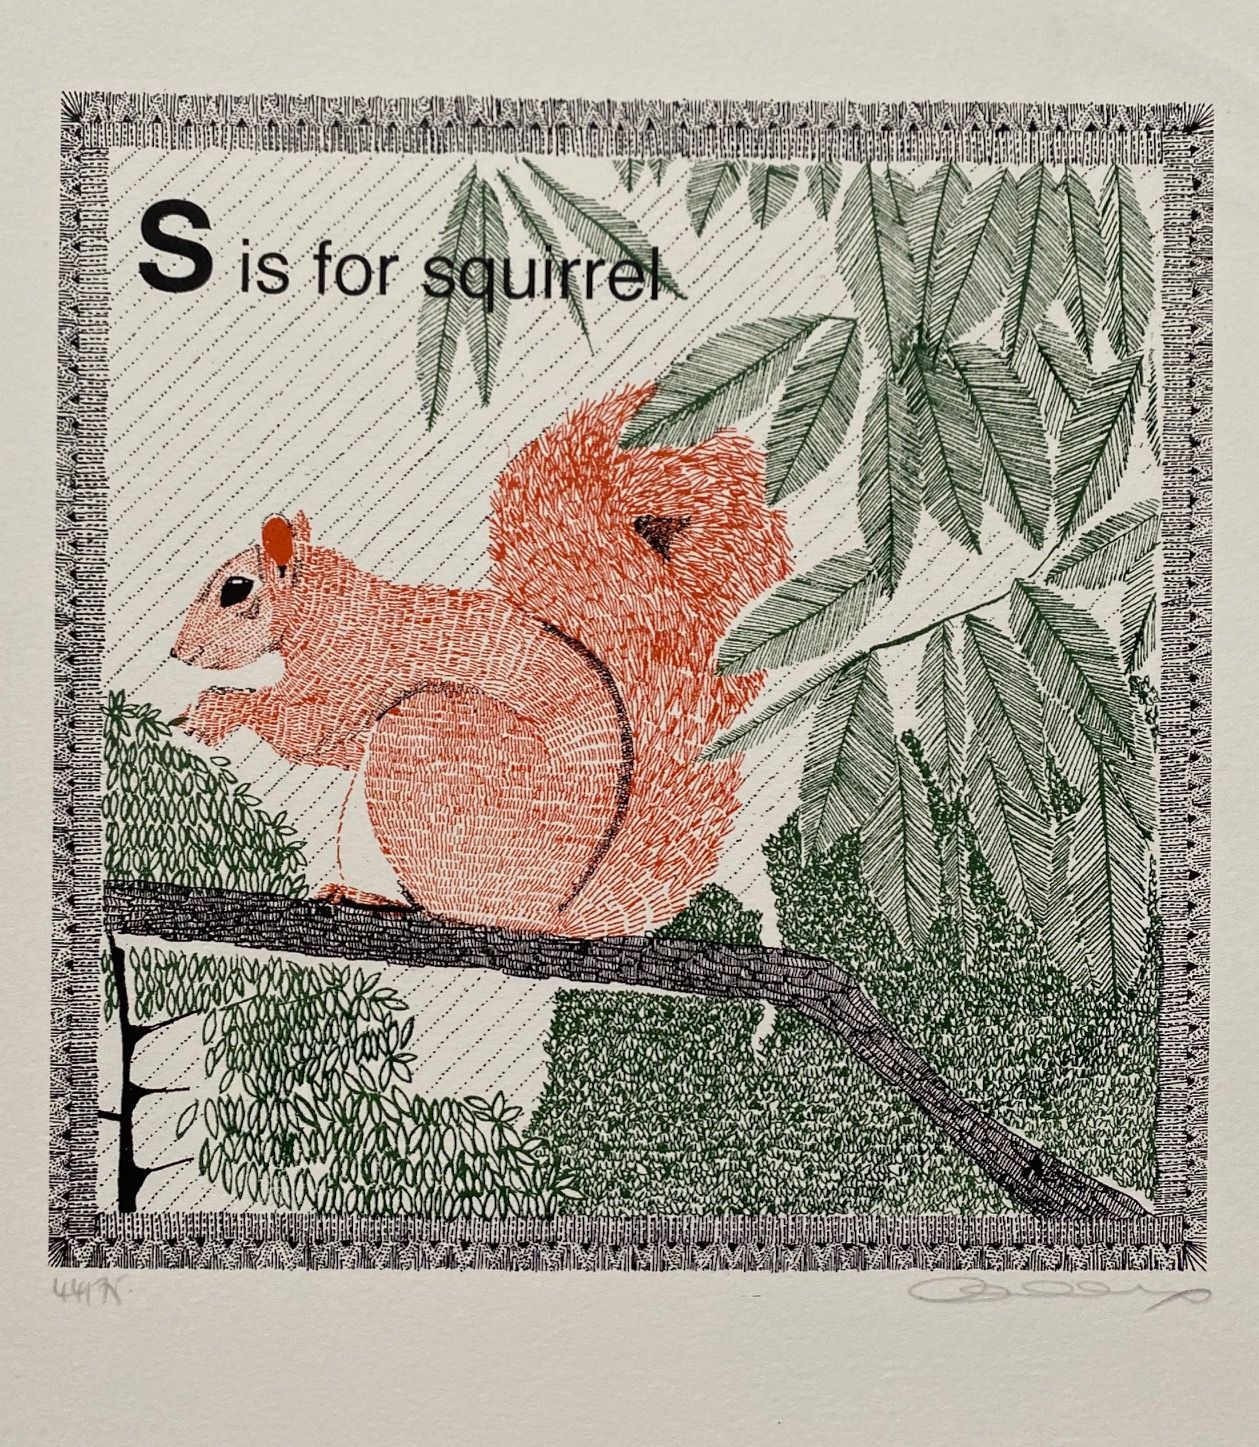 S is for Squirrel (small) by Clare Halifax